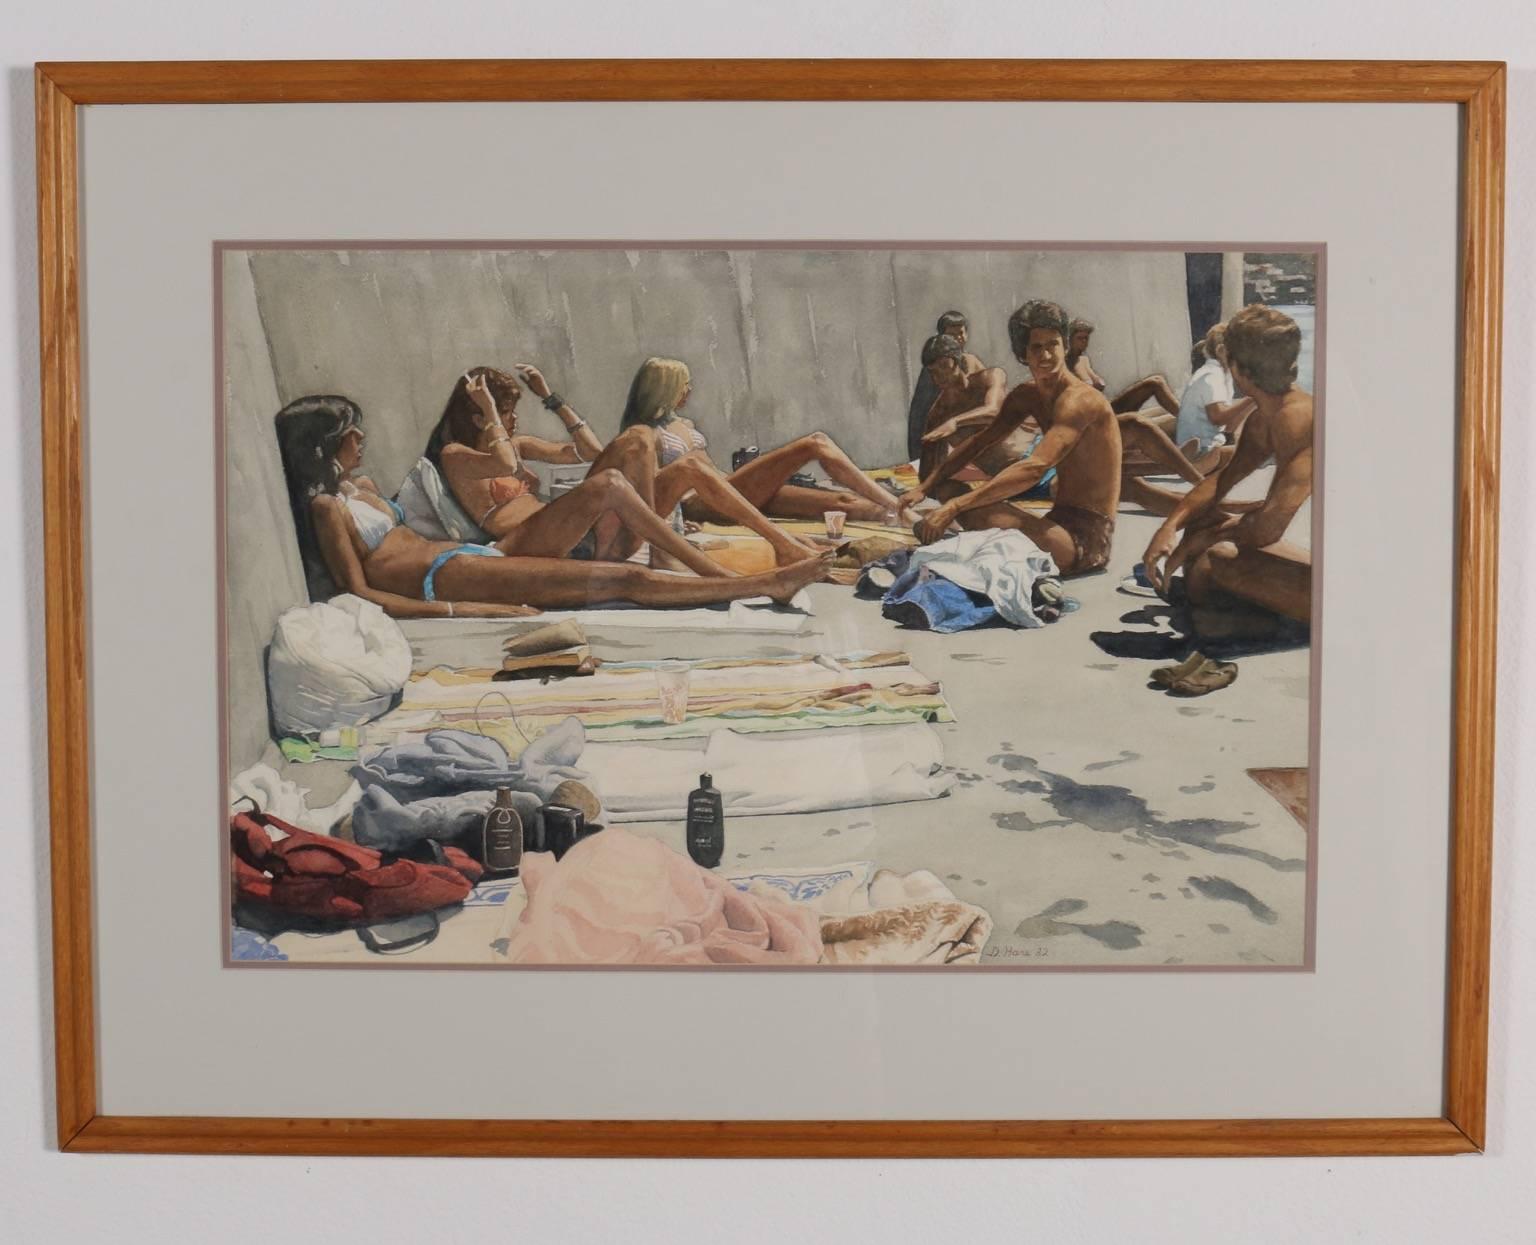 Stunning watercolor of youths at the beach - capturing the spirit of Southern California in 1982. As an Olympic and world champion volleyball player, Dennis Hare, a California native had much to draw from his time in the sand. The realism in this